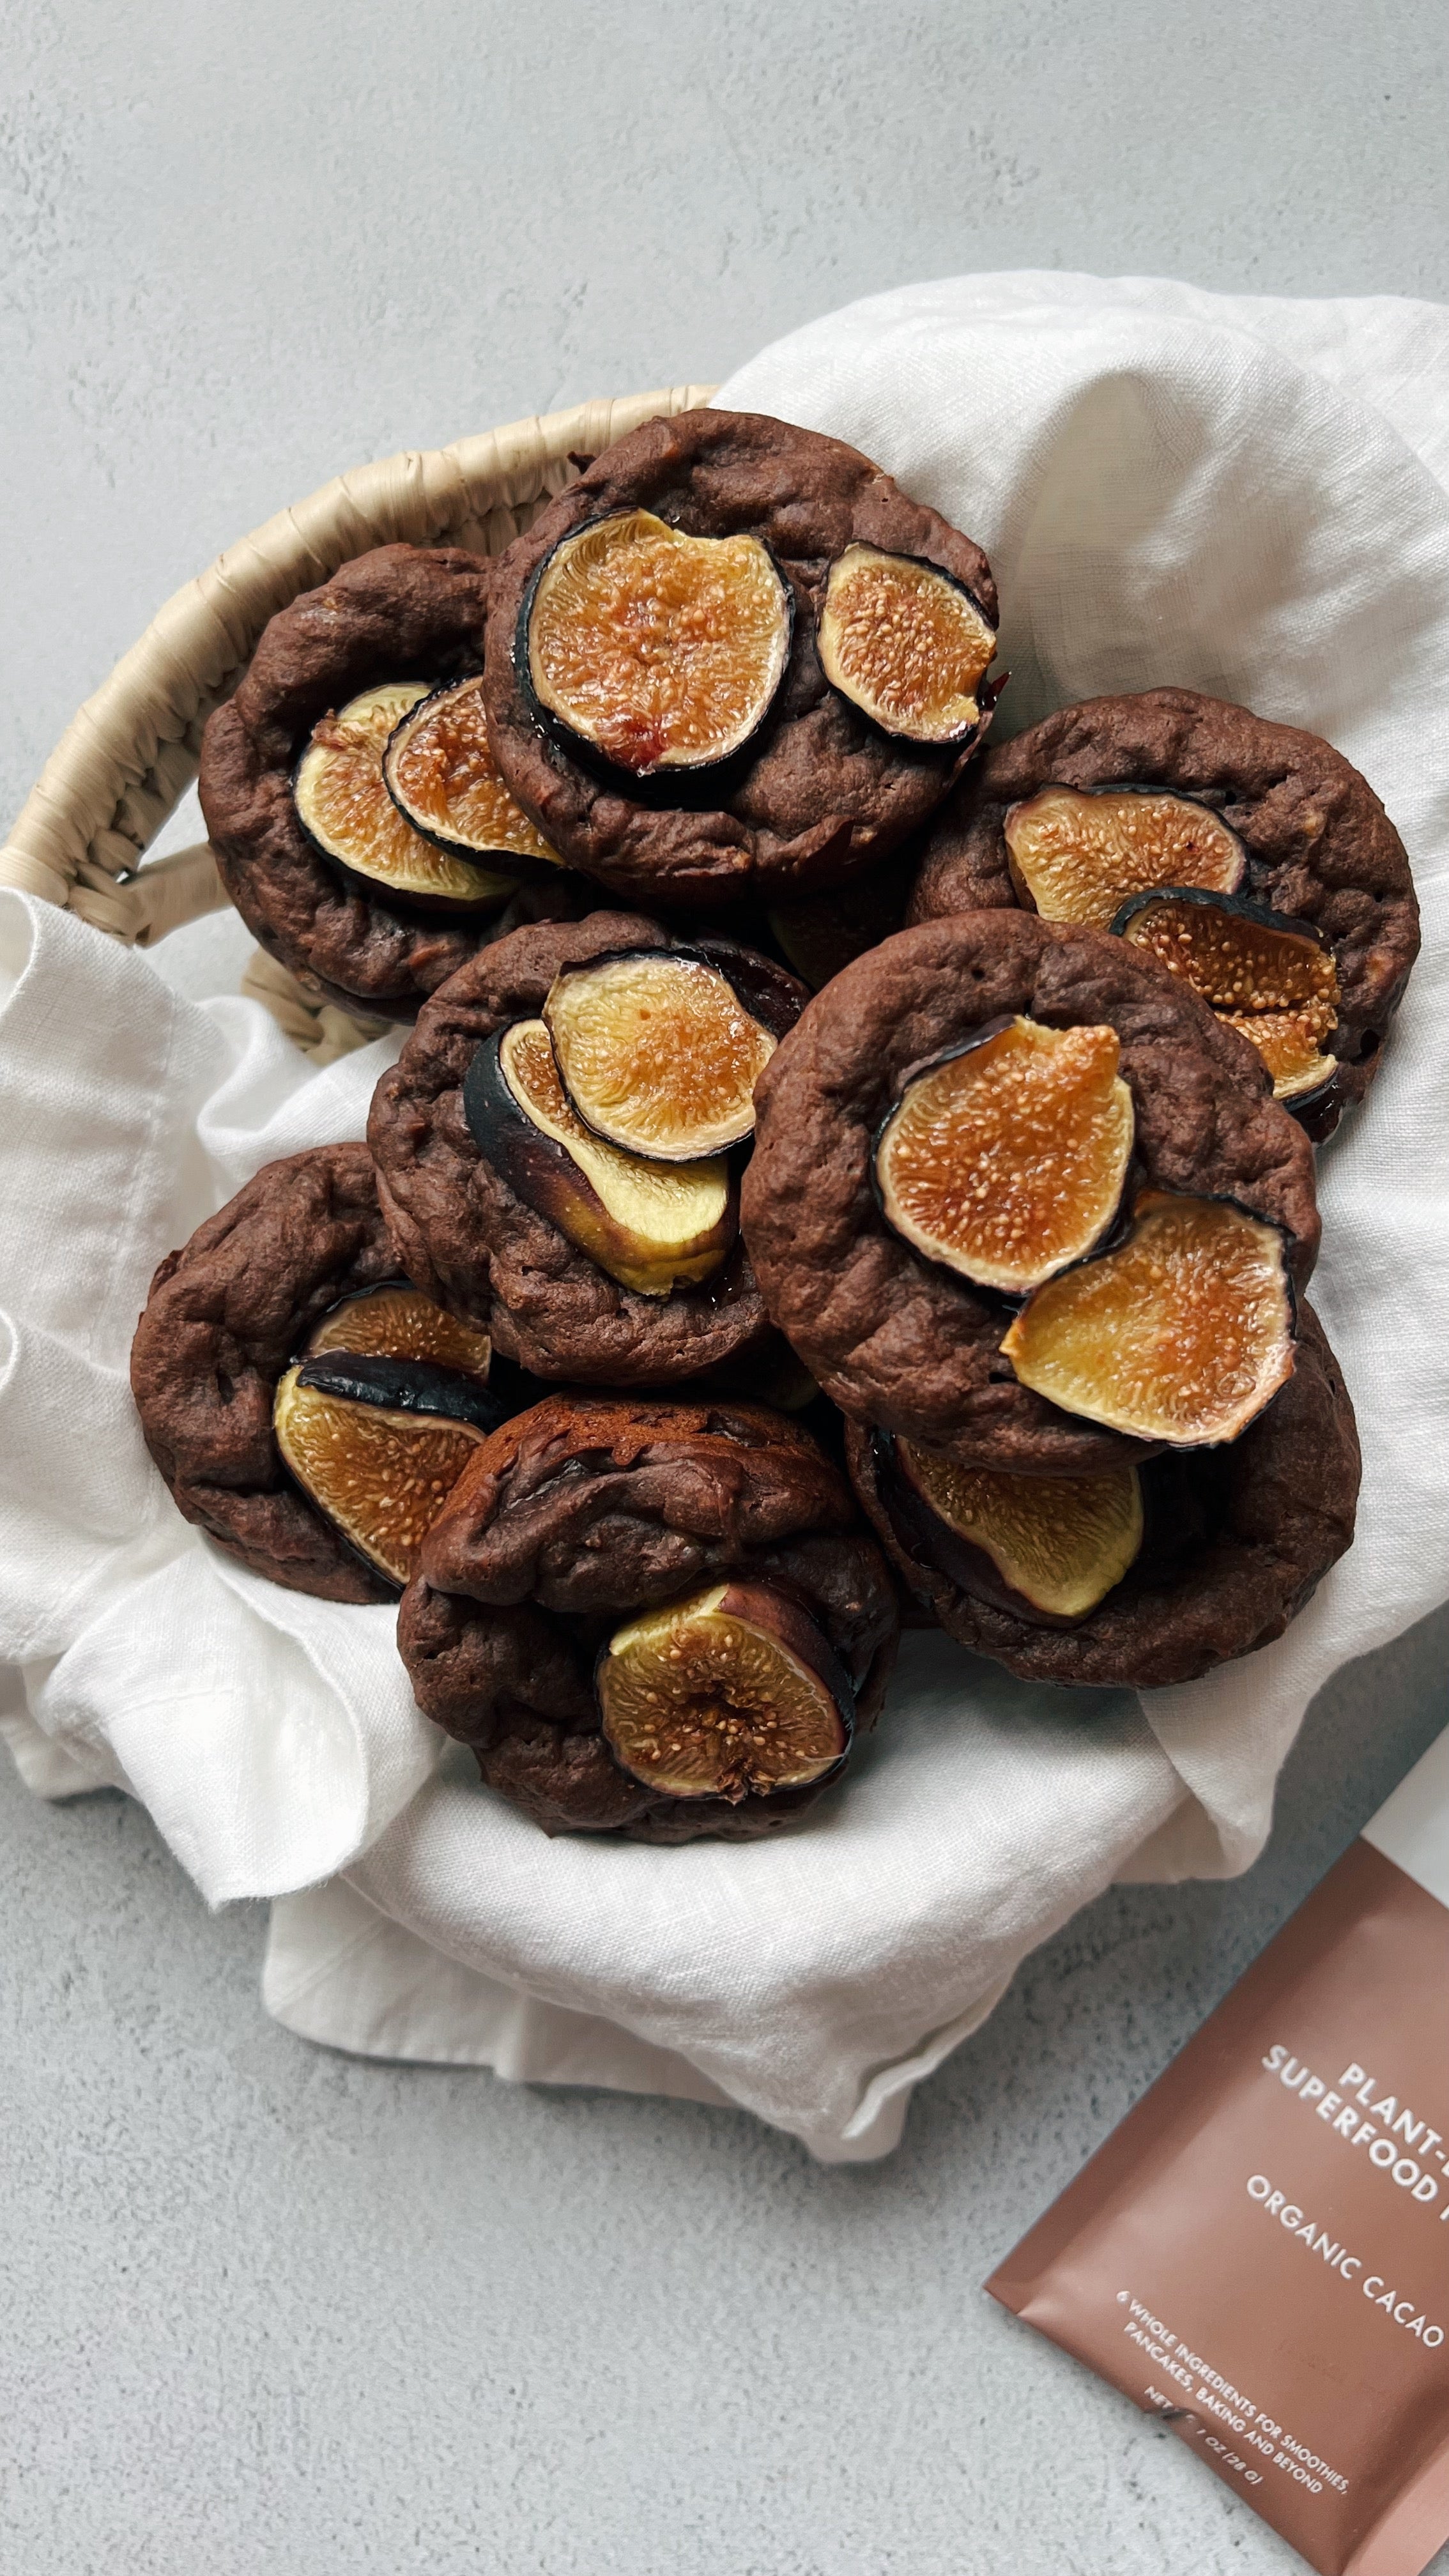 Tejari_Organic_Cacao_and_Greens_Muffins Figs